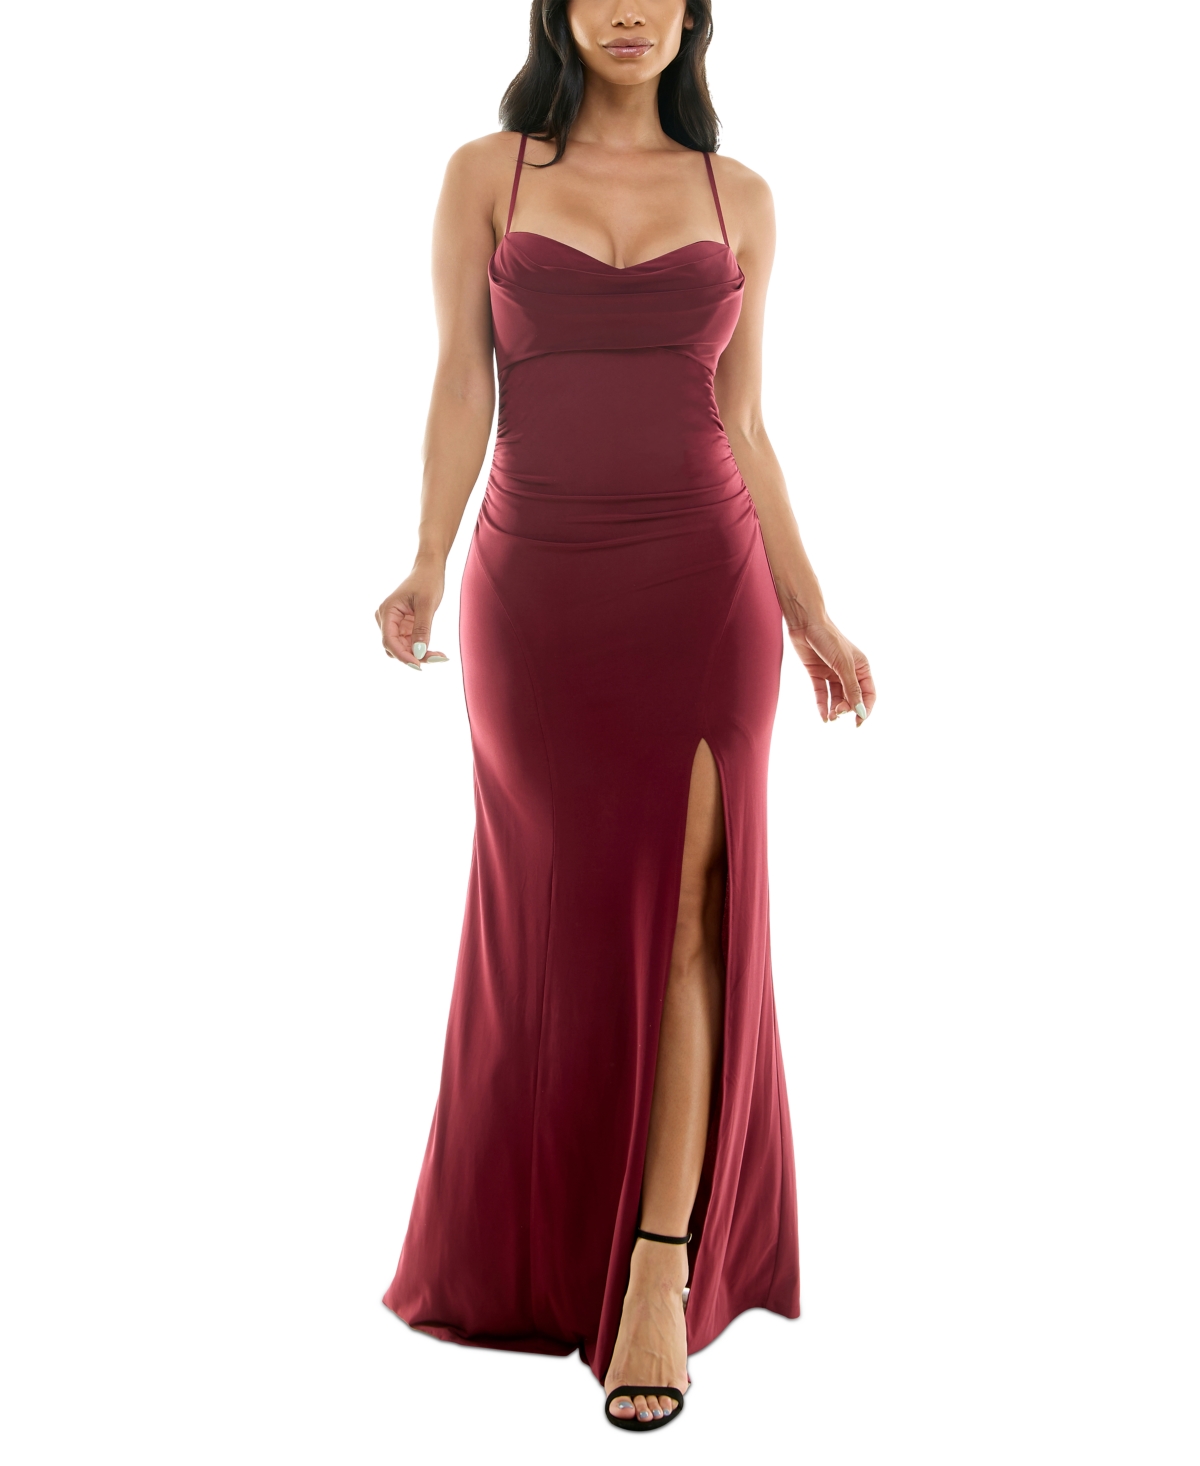 Juniors' Cowlneck Ruched Gown - Burgundy